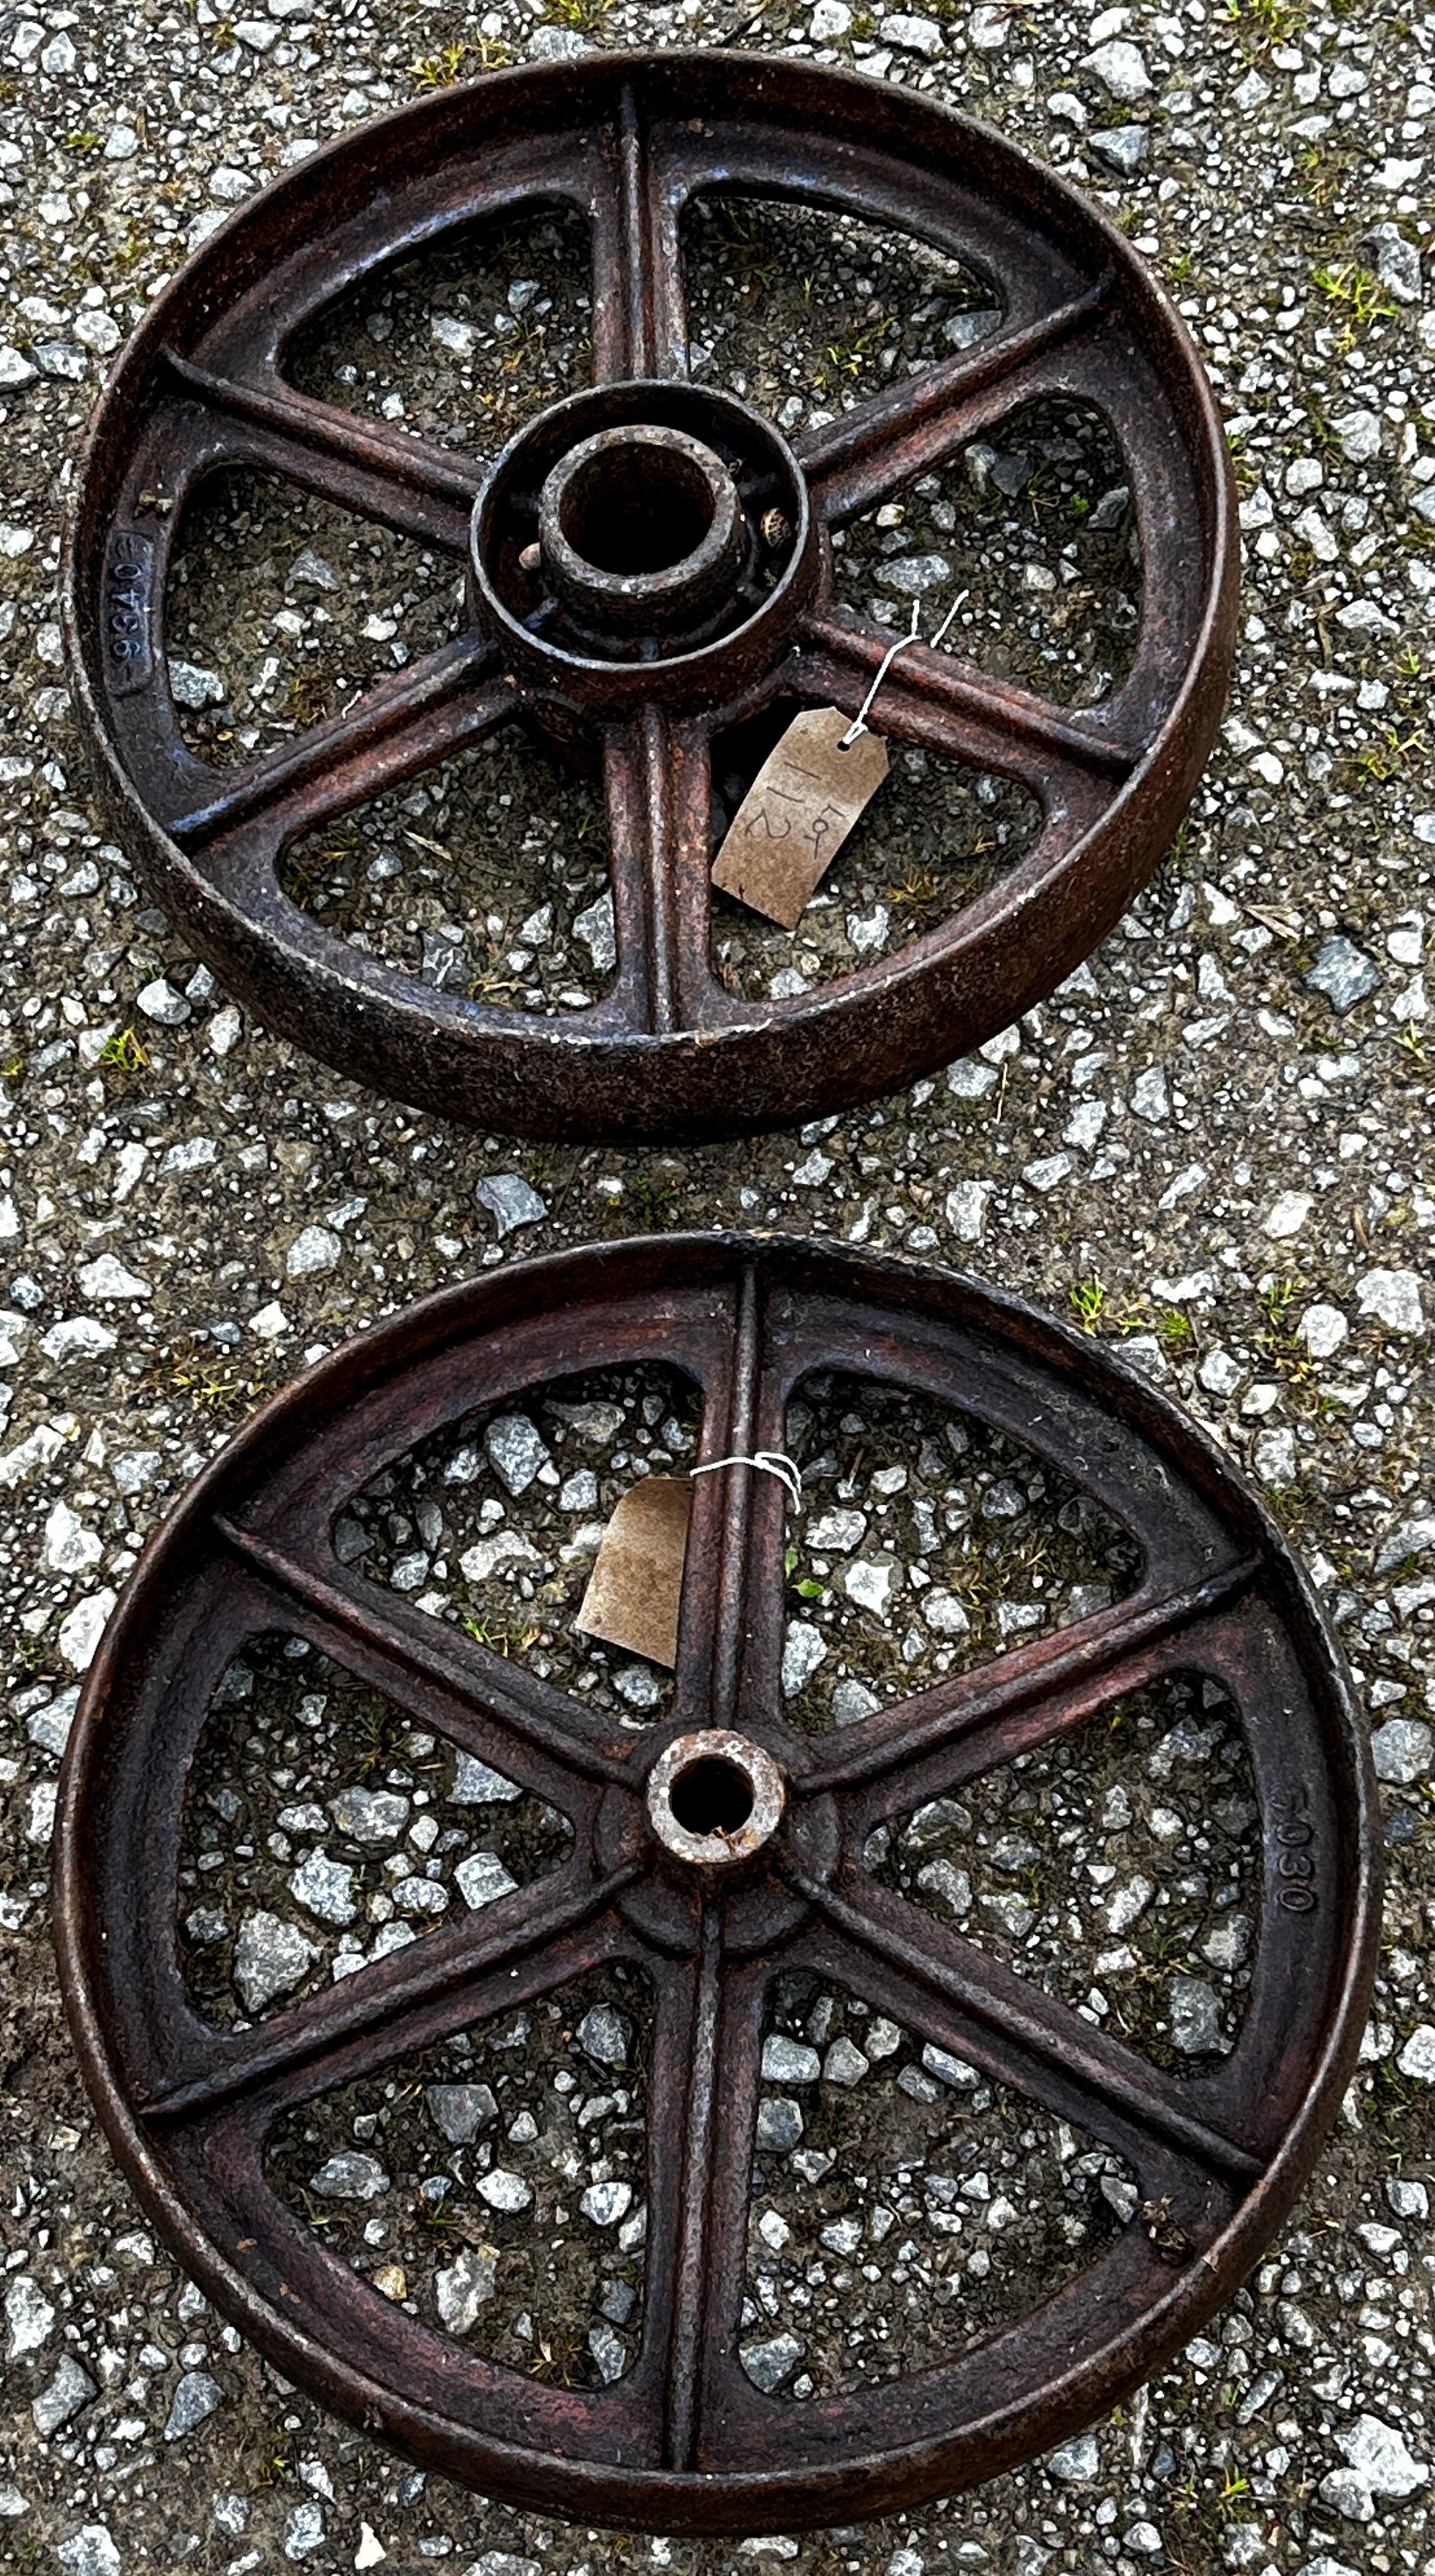 A pair of vintage cast iron implement wheels stamped with numbers 9340, 44 cm diameter - Image 2 of 4